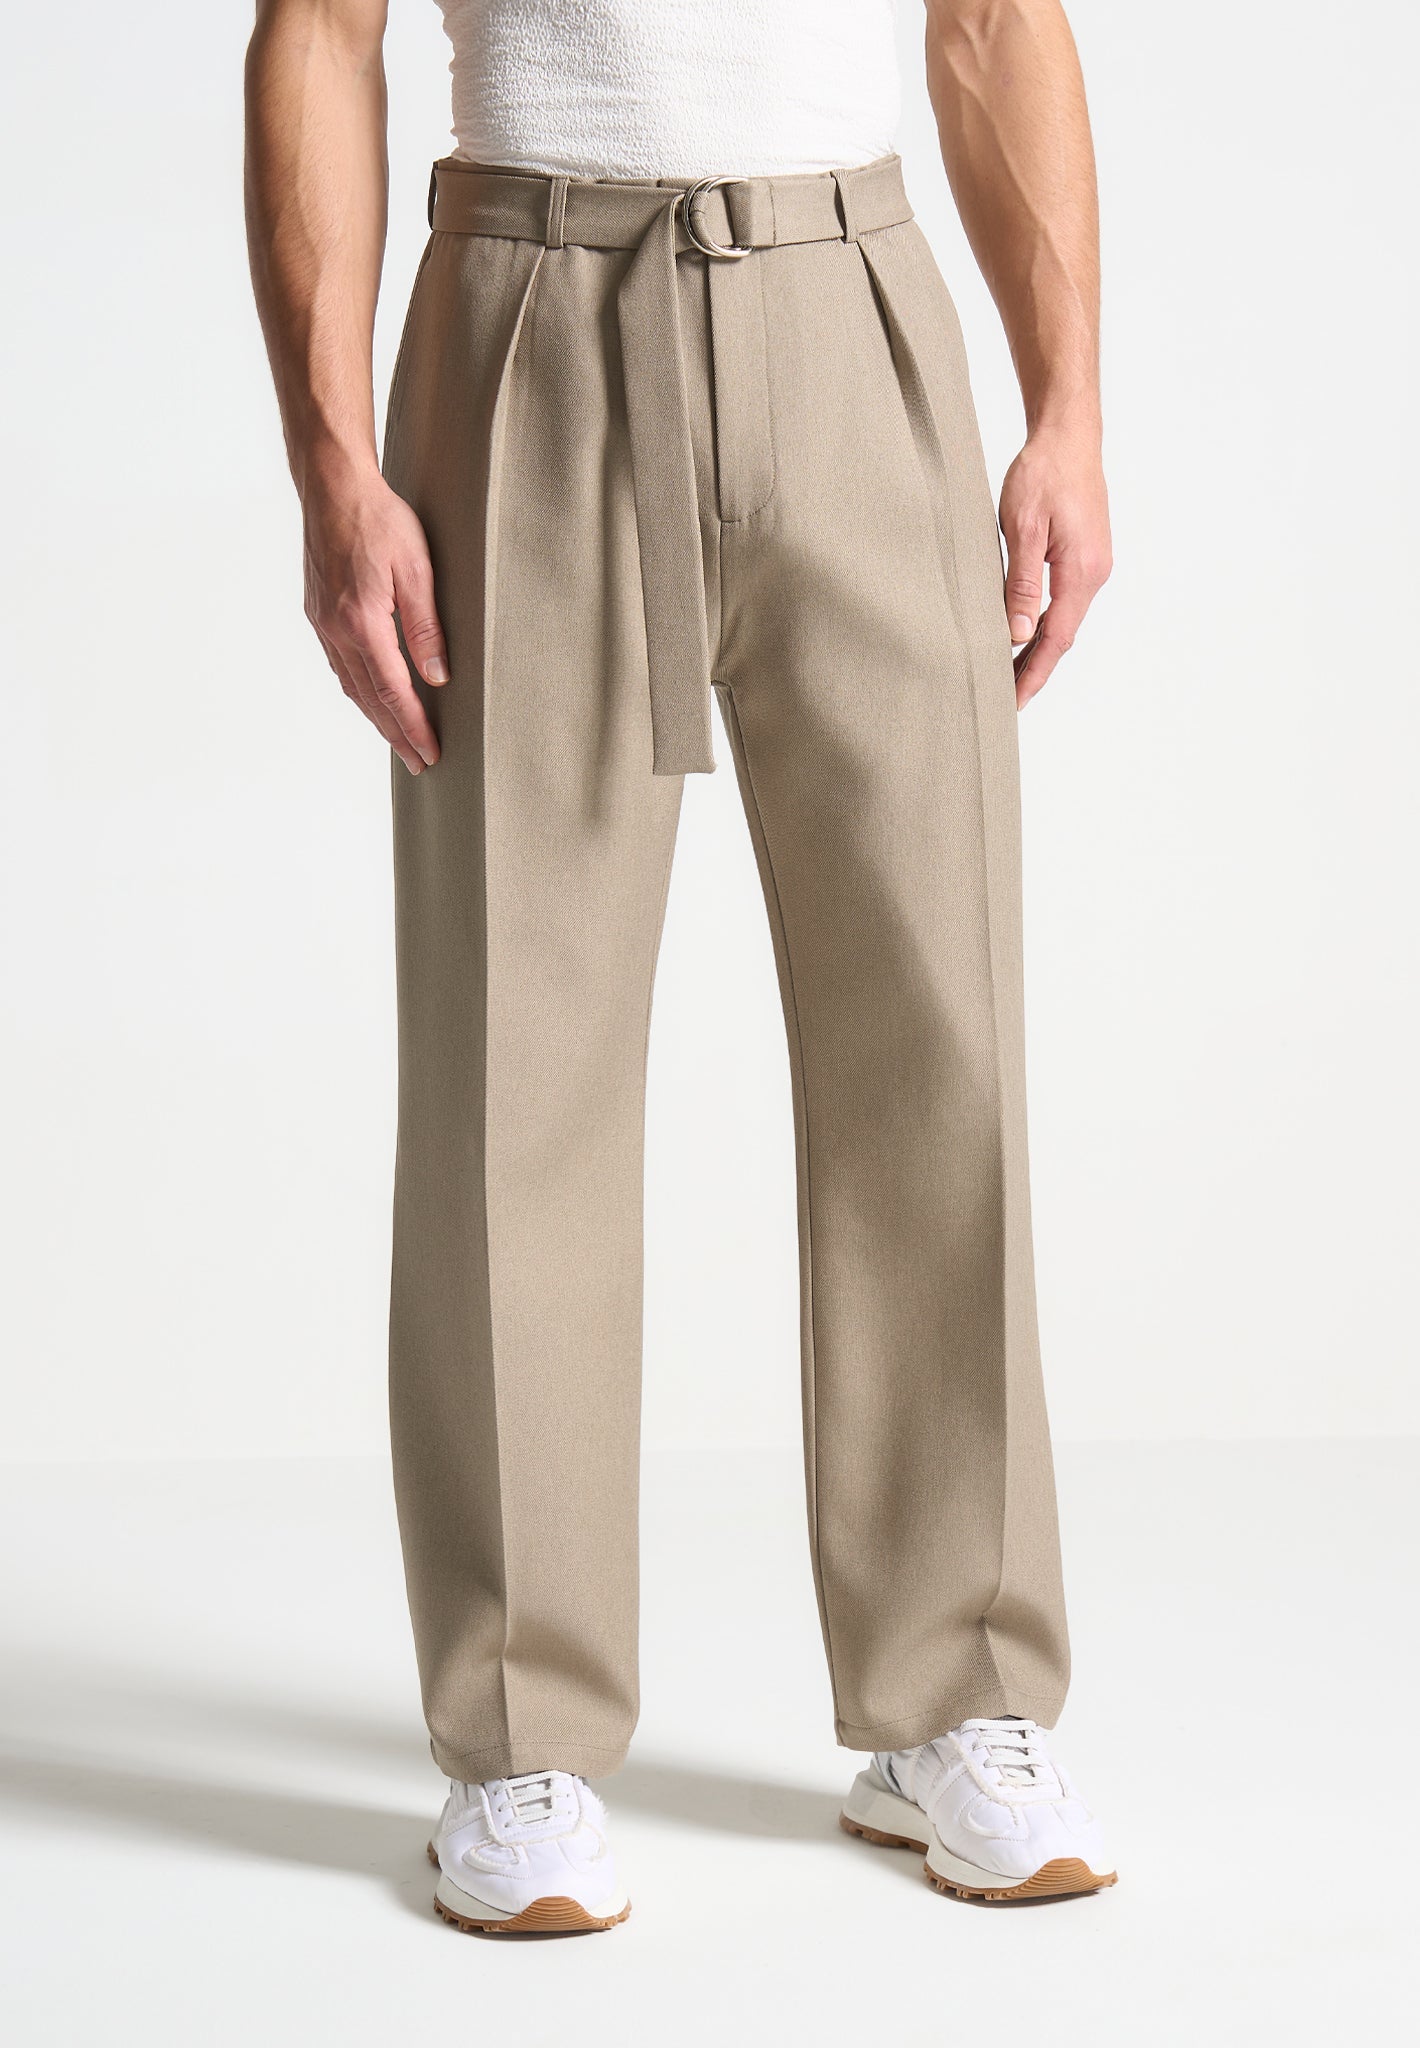 textured-belted-tailored-trousers-beige-1